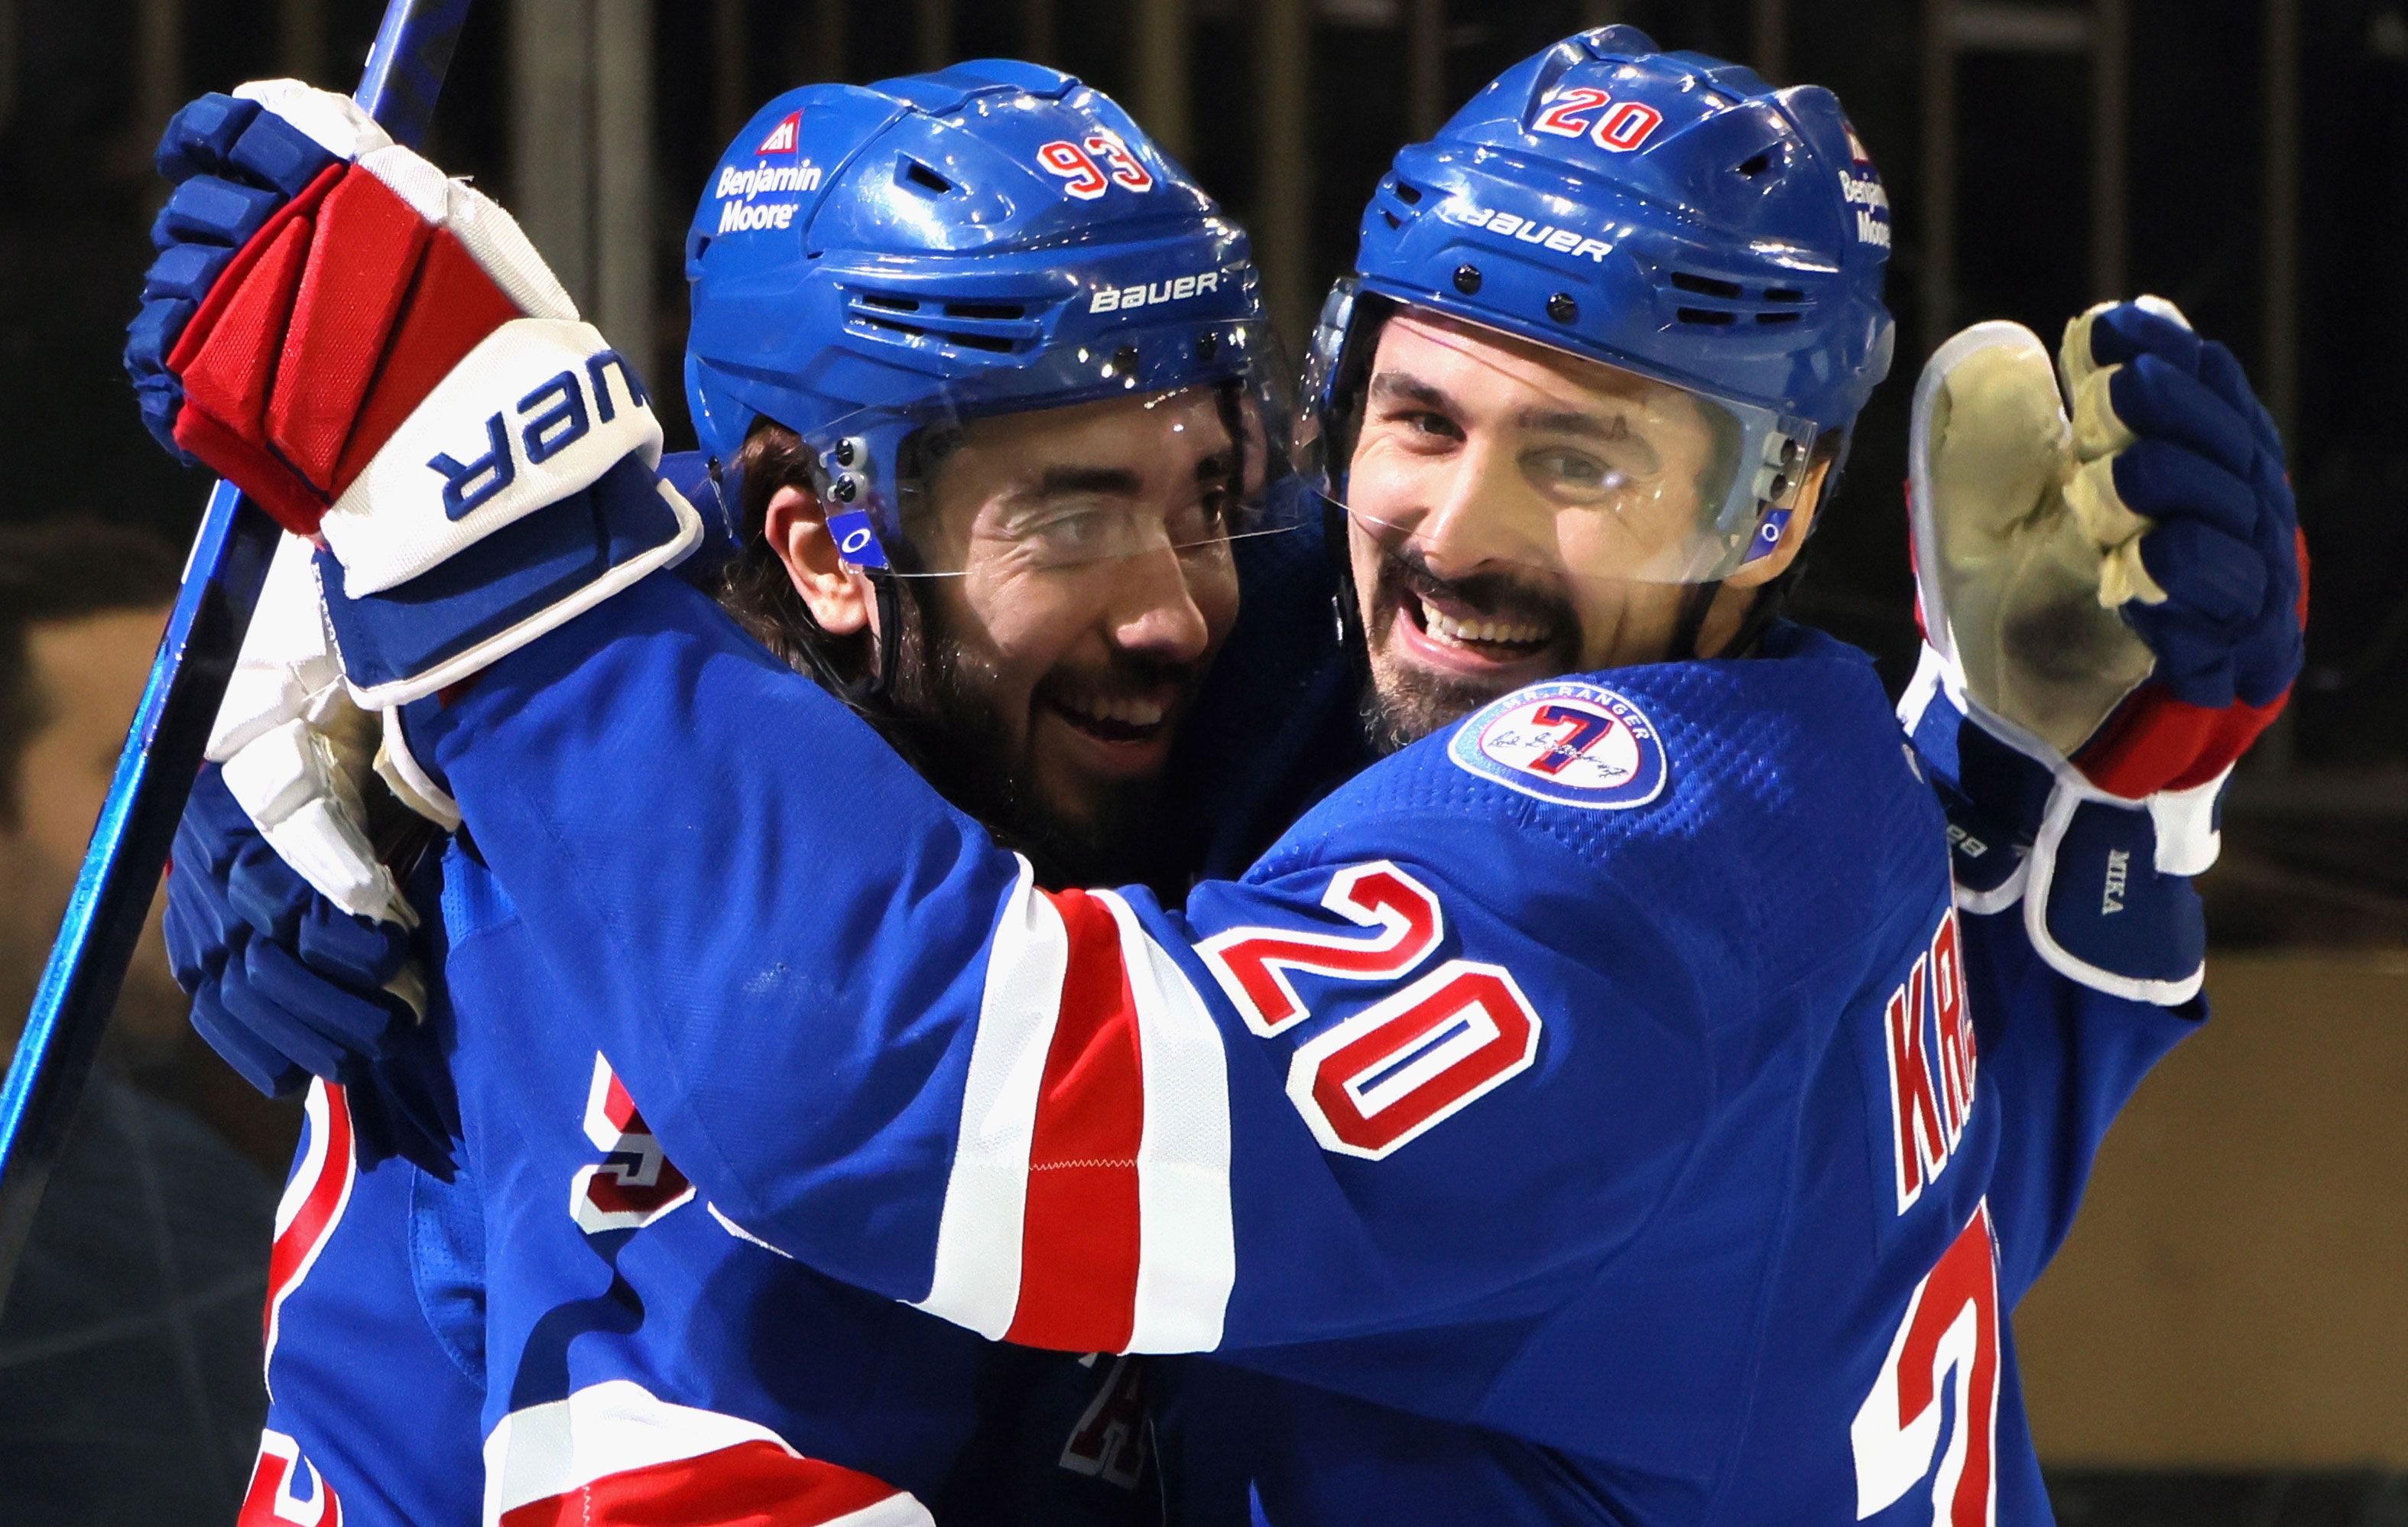 New York Rangers Uniforms: Best and Worst in Team History